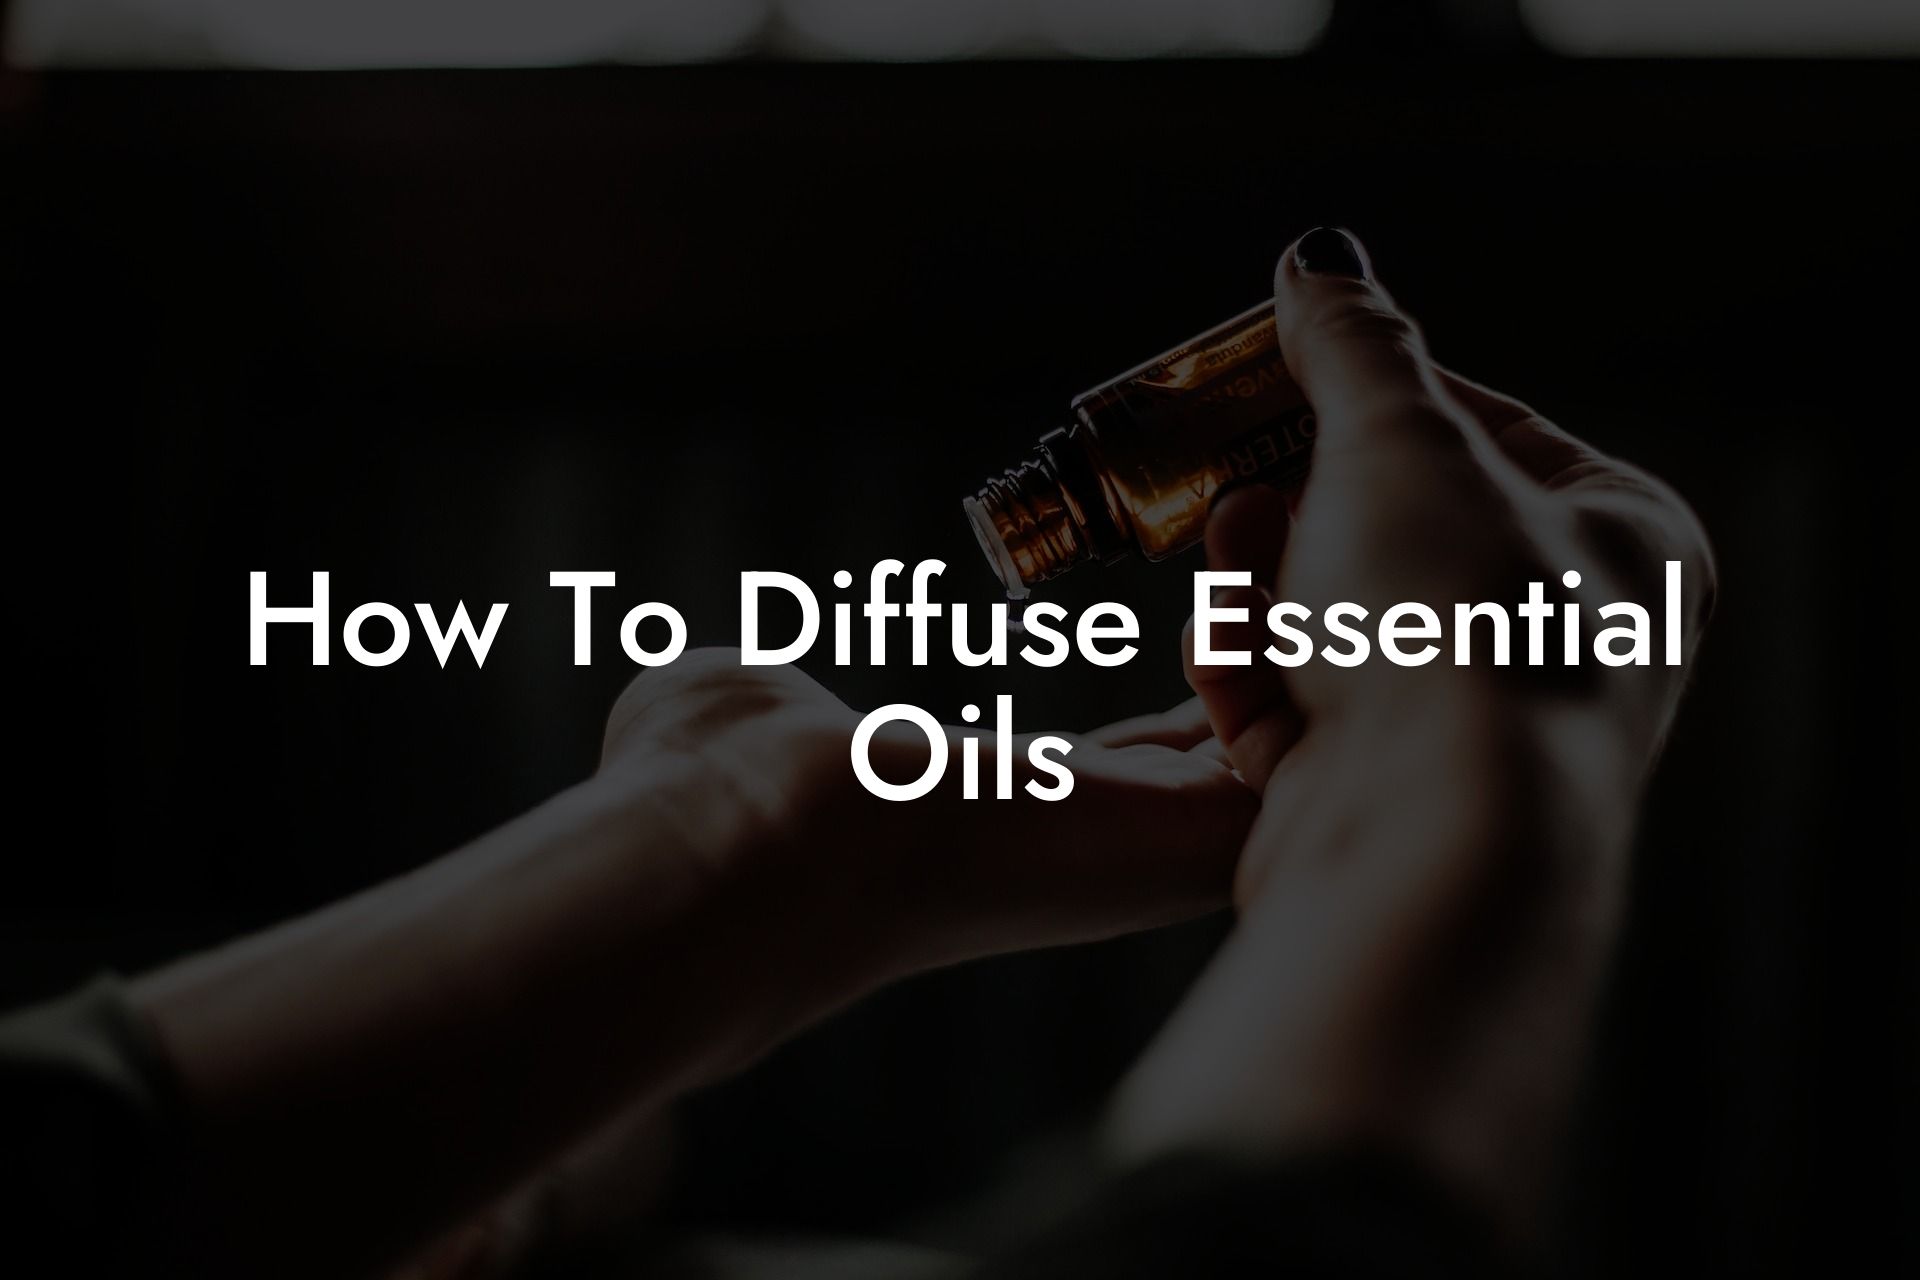 How To Diffuse Essential Oils